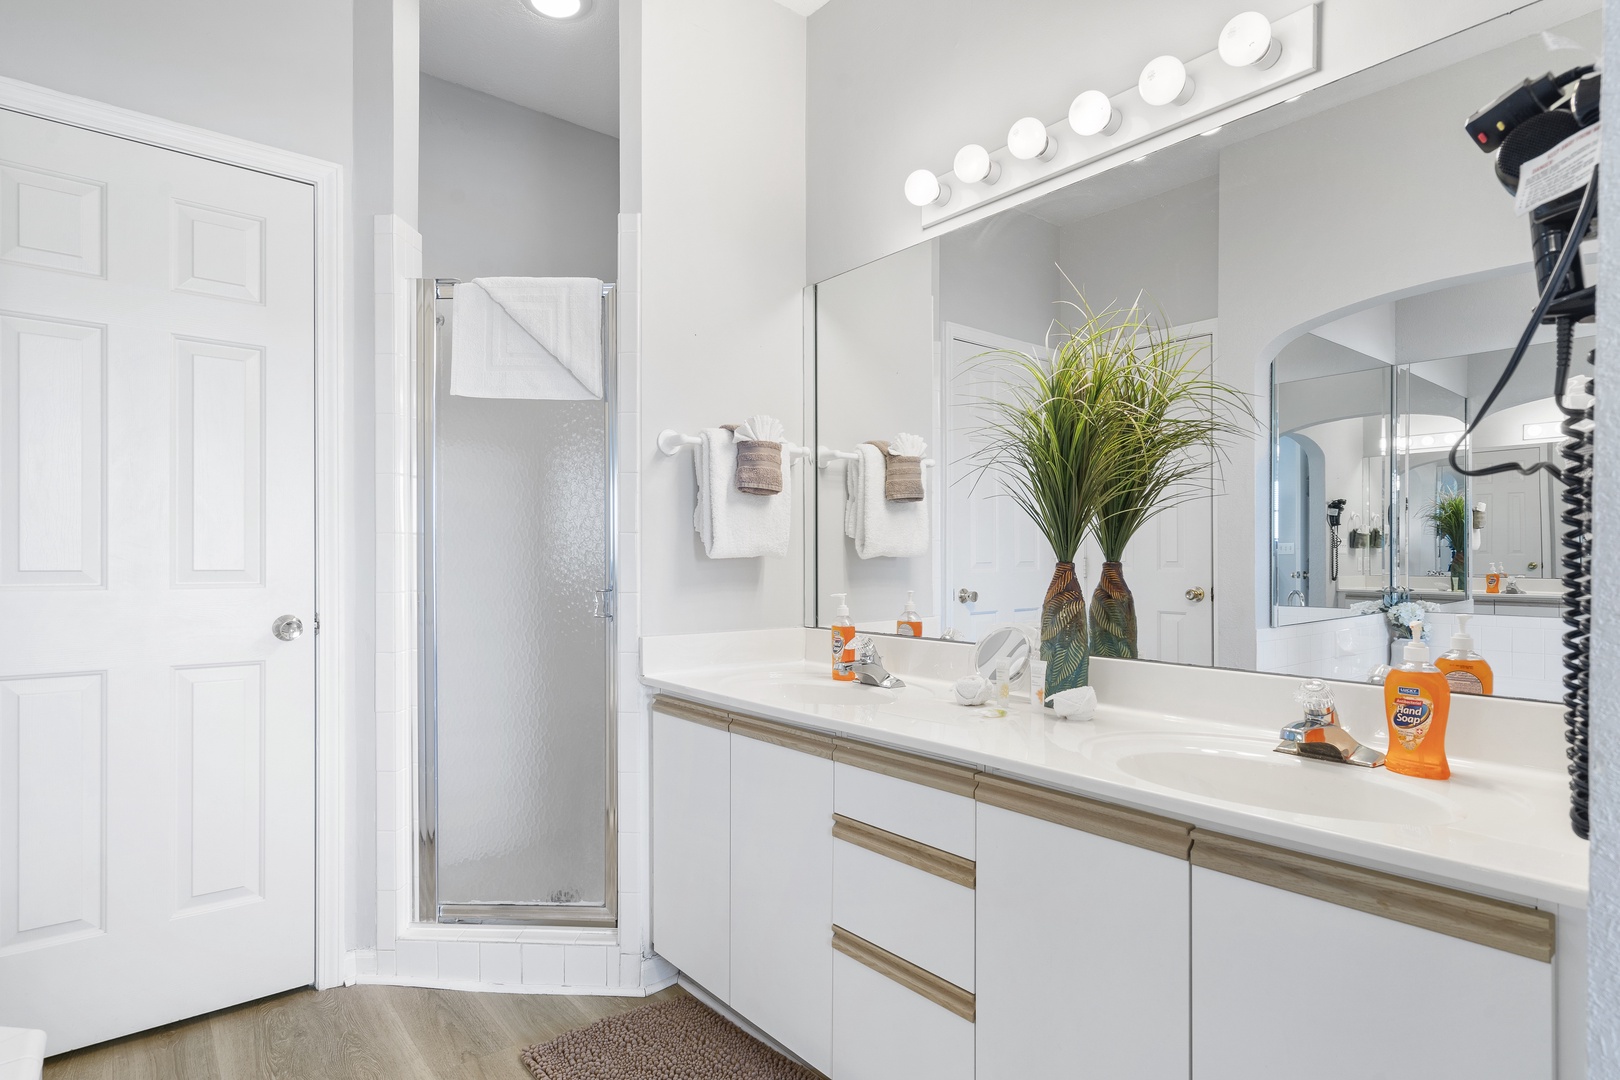 The king ensuite offers a double vanity, shower, & luxurious soaking tub